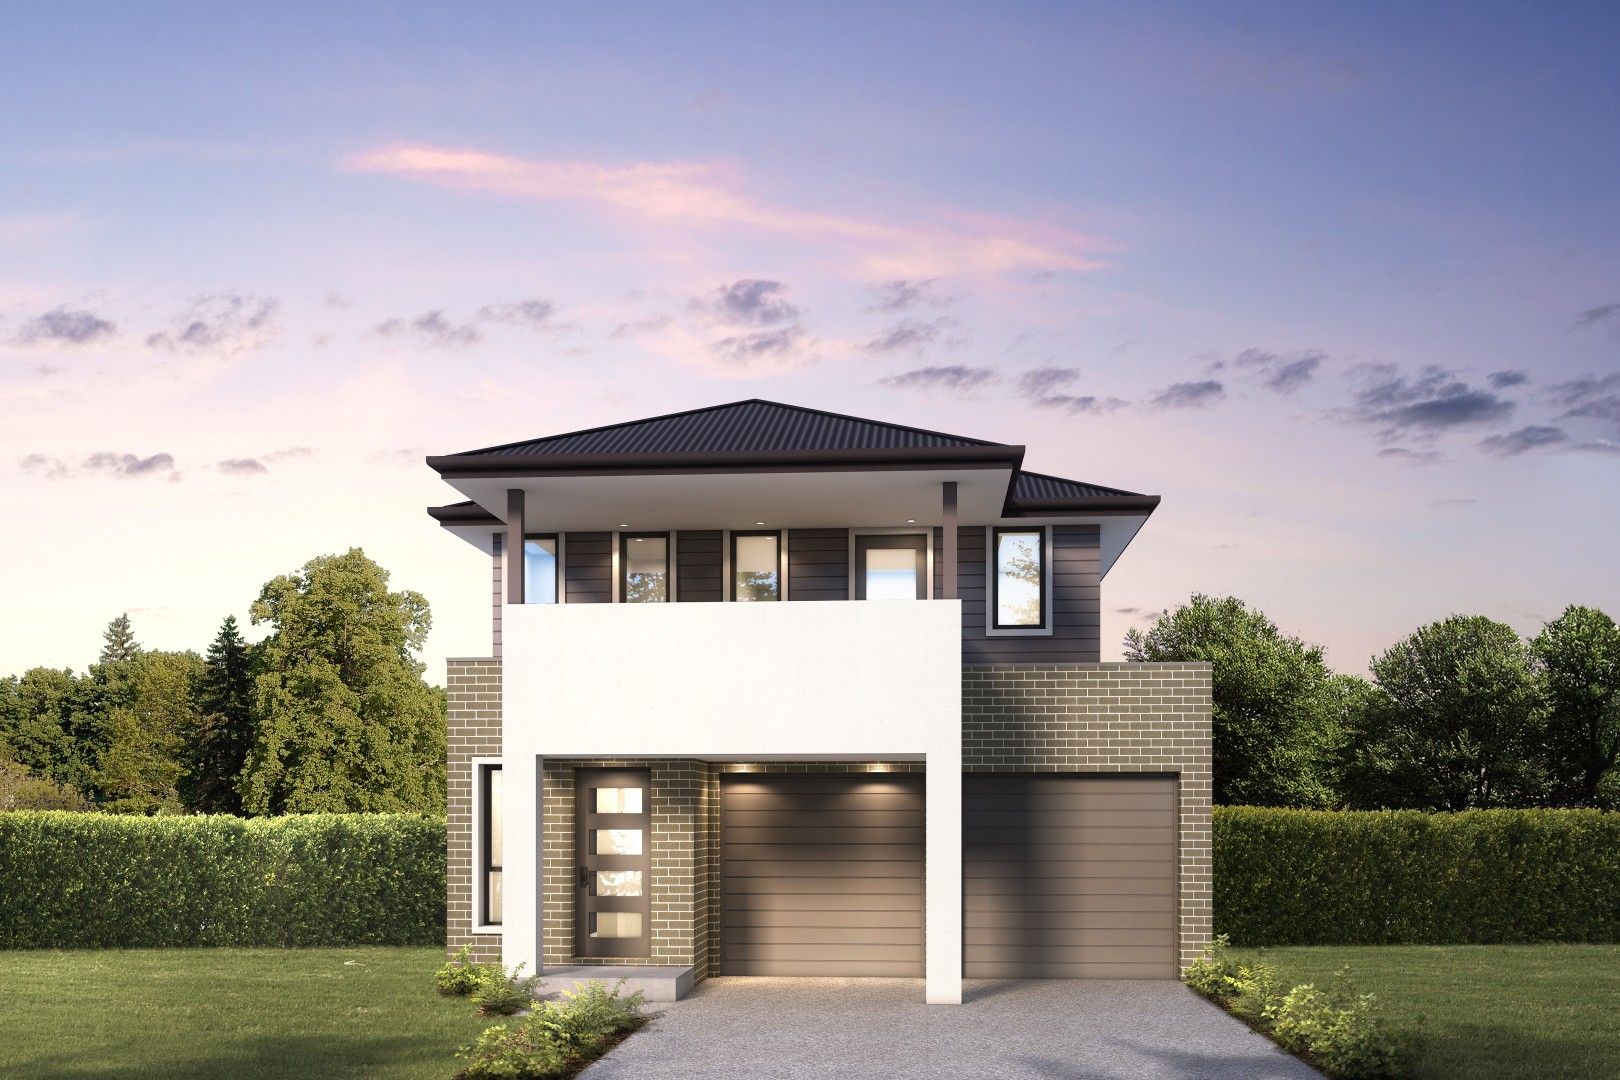 4 bedrooms New House & Land in Lot 18 Proposed Road GLEDSWOOD HILLS NSW, 2557